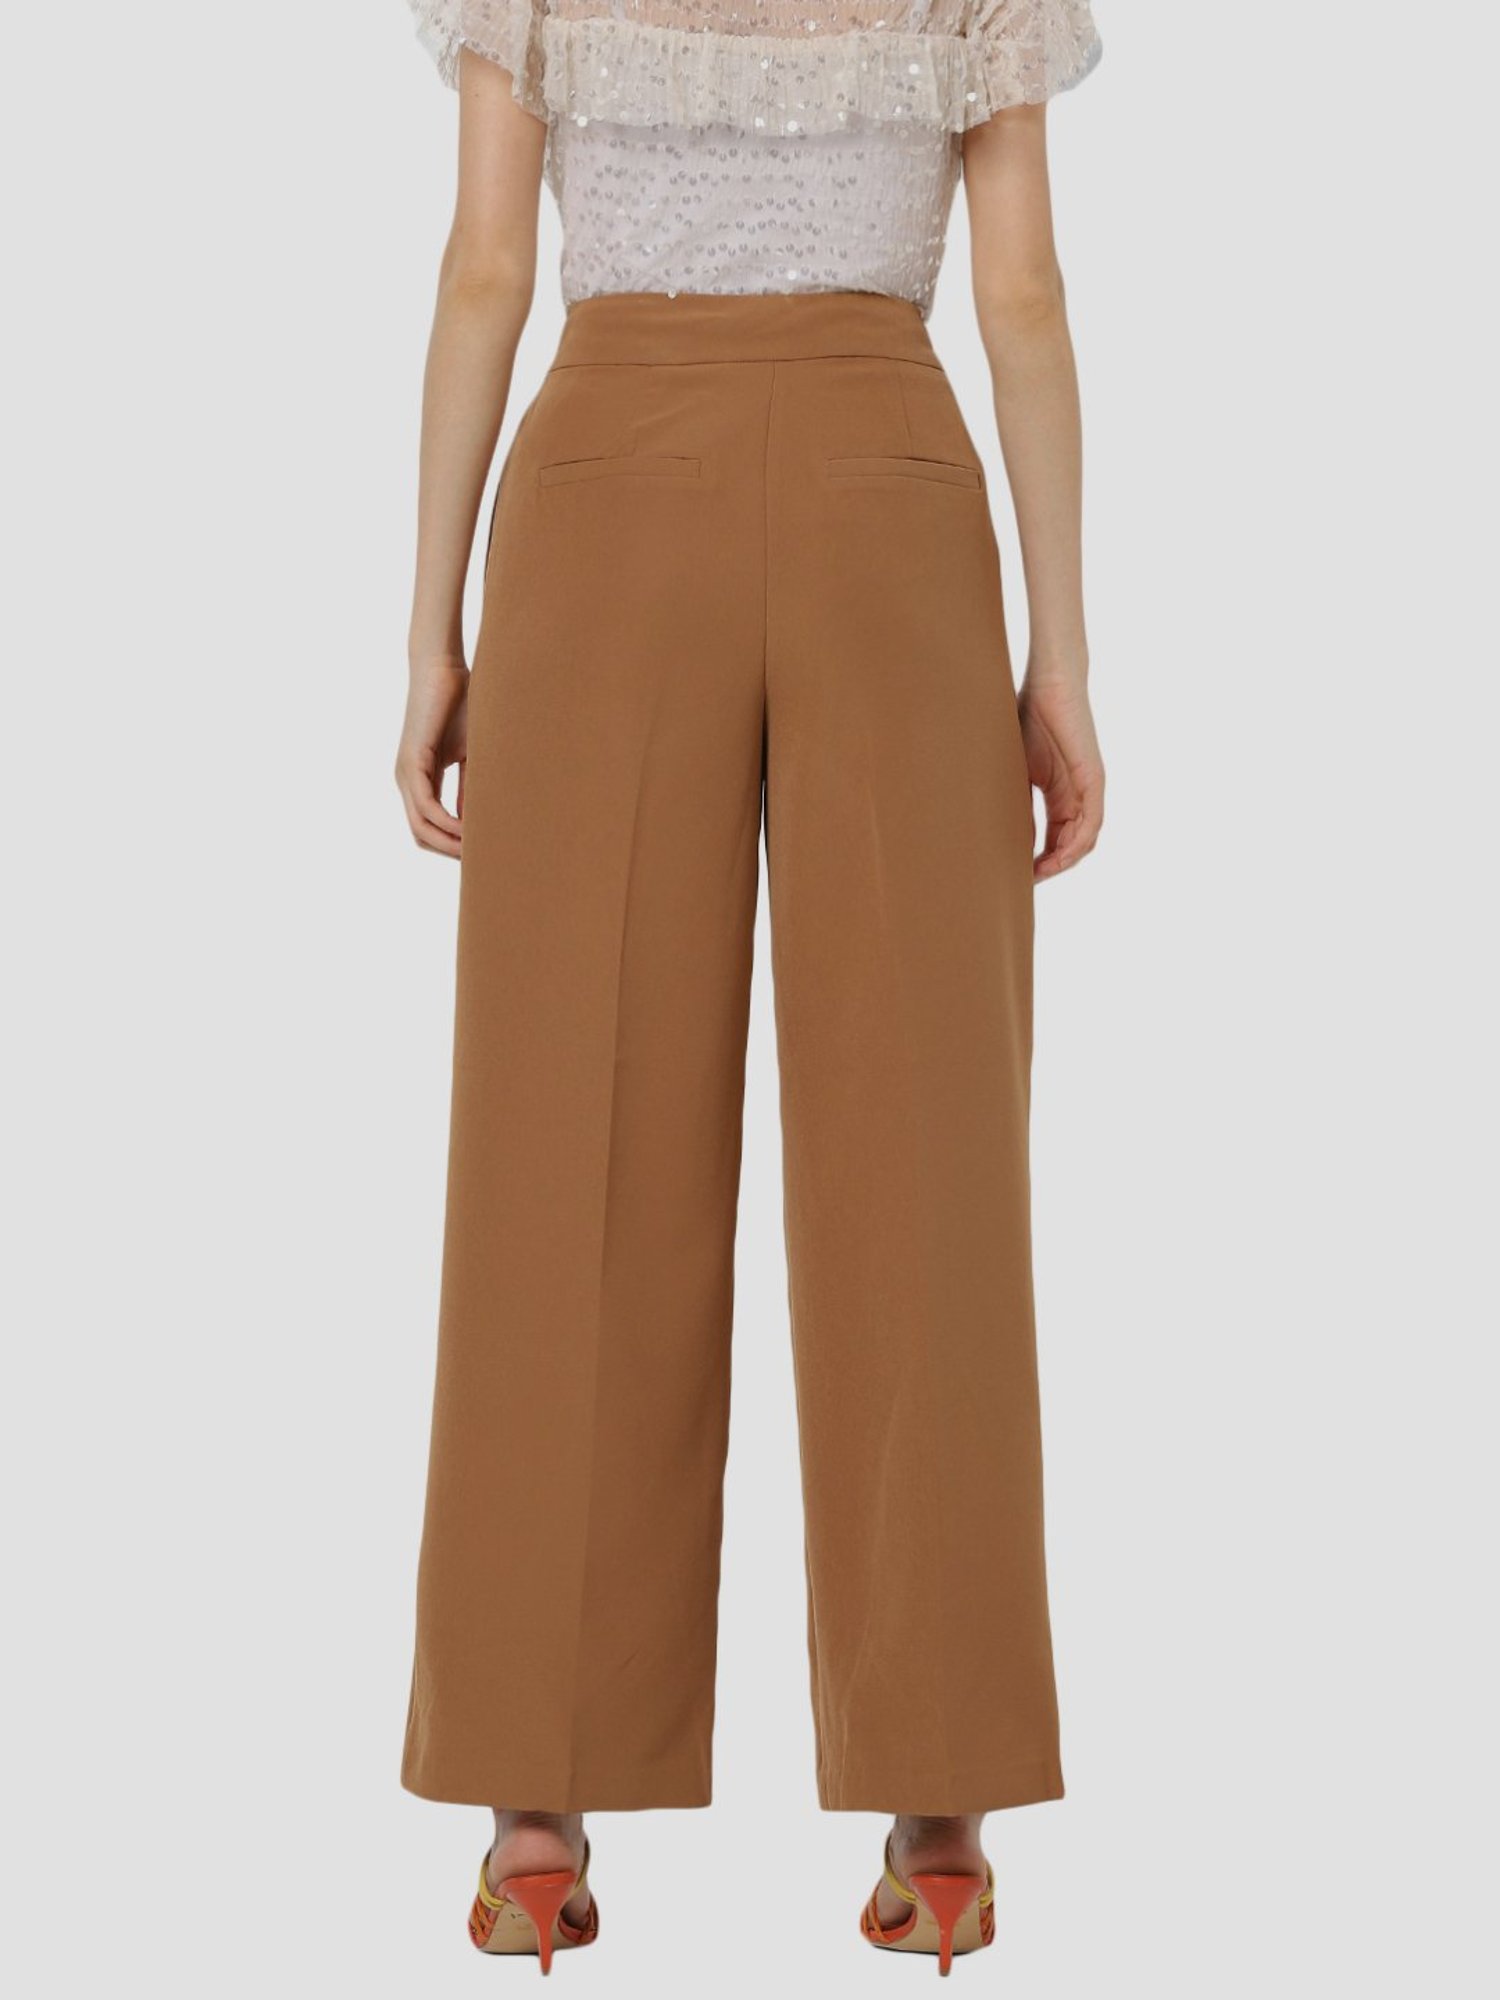 10 Best Affordable HighWaisted Trousers For Short Women  Mama In Heels